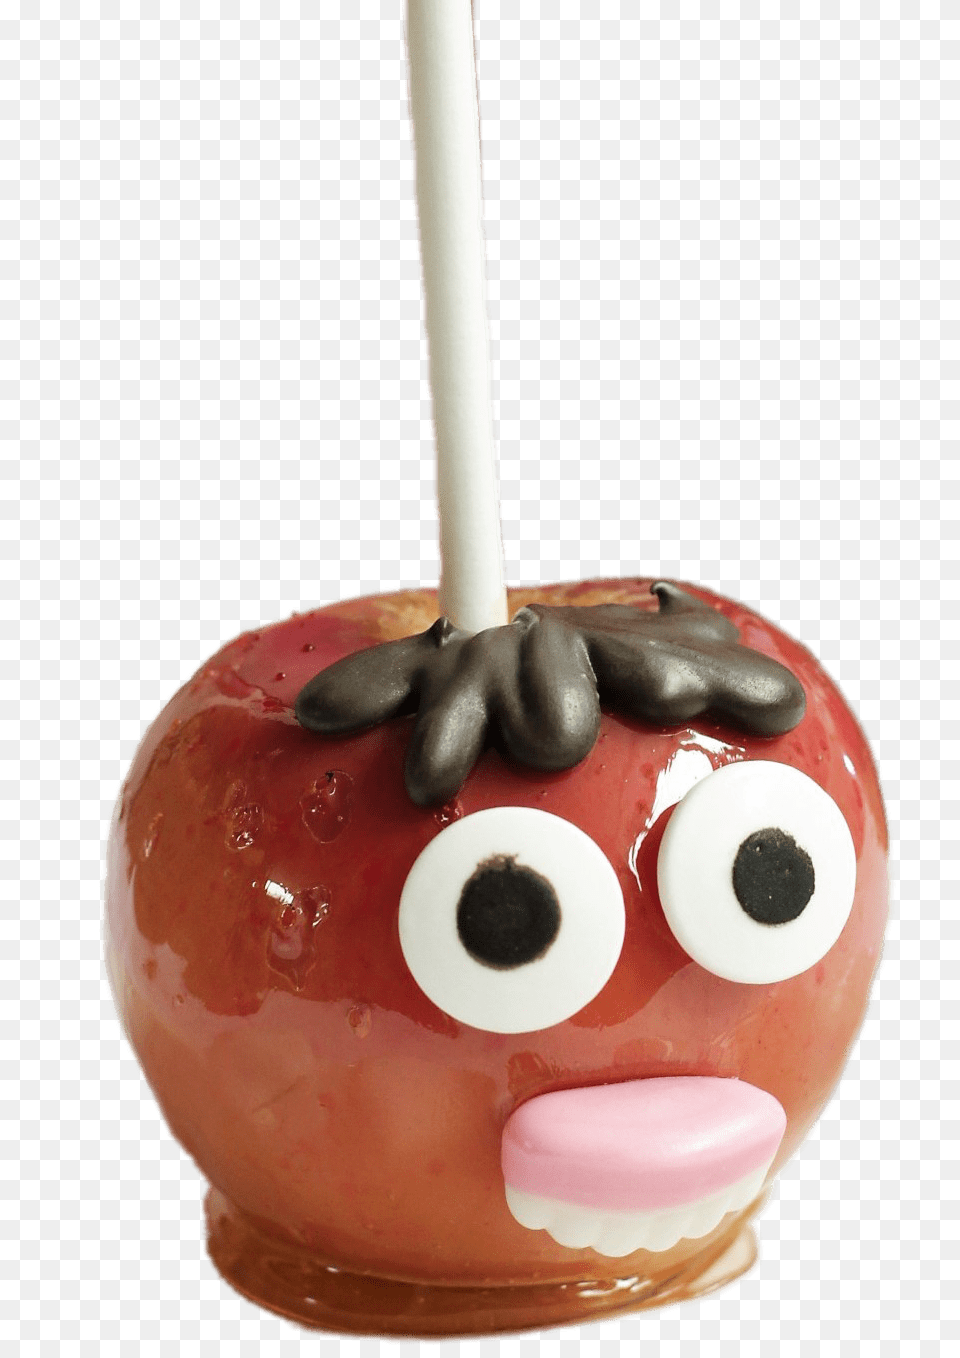 Toffee Apple With A Face, Food, Sweets, Caramel, Dessert Free Png